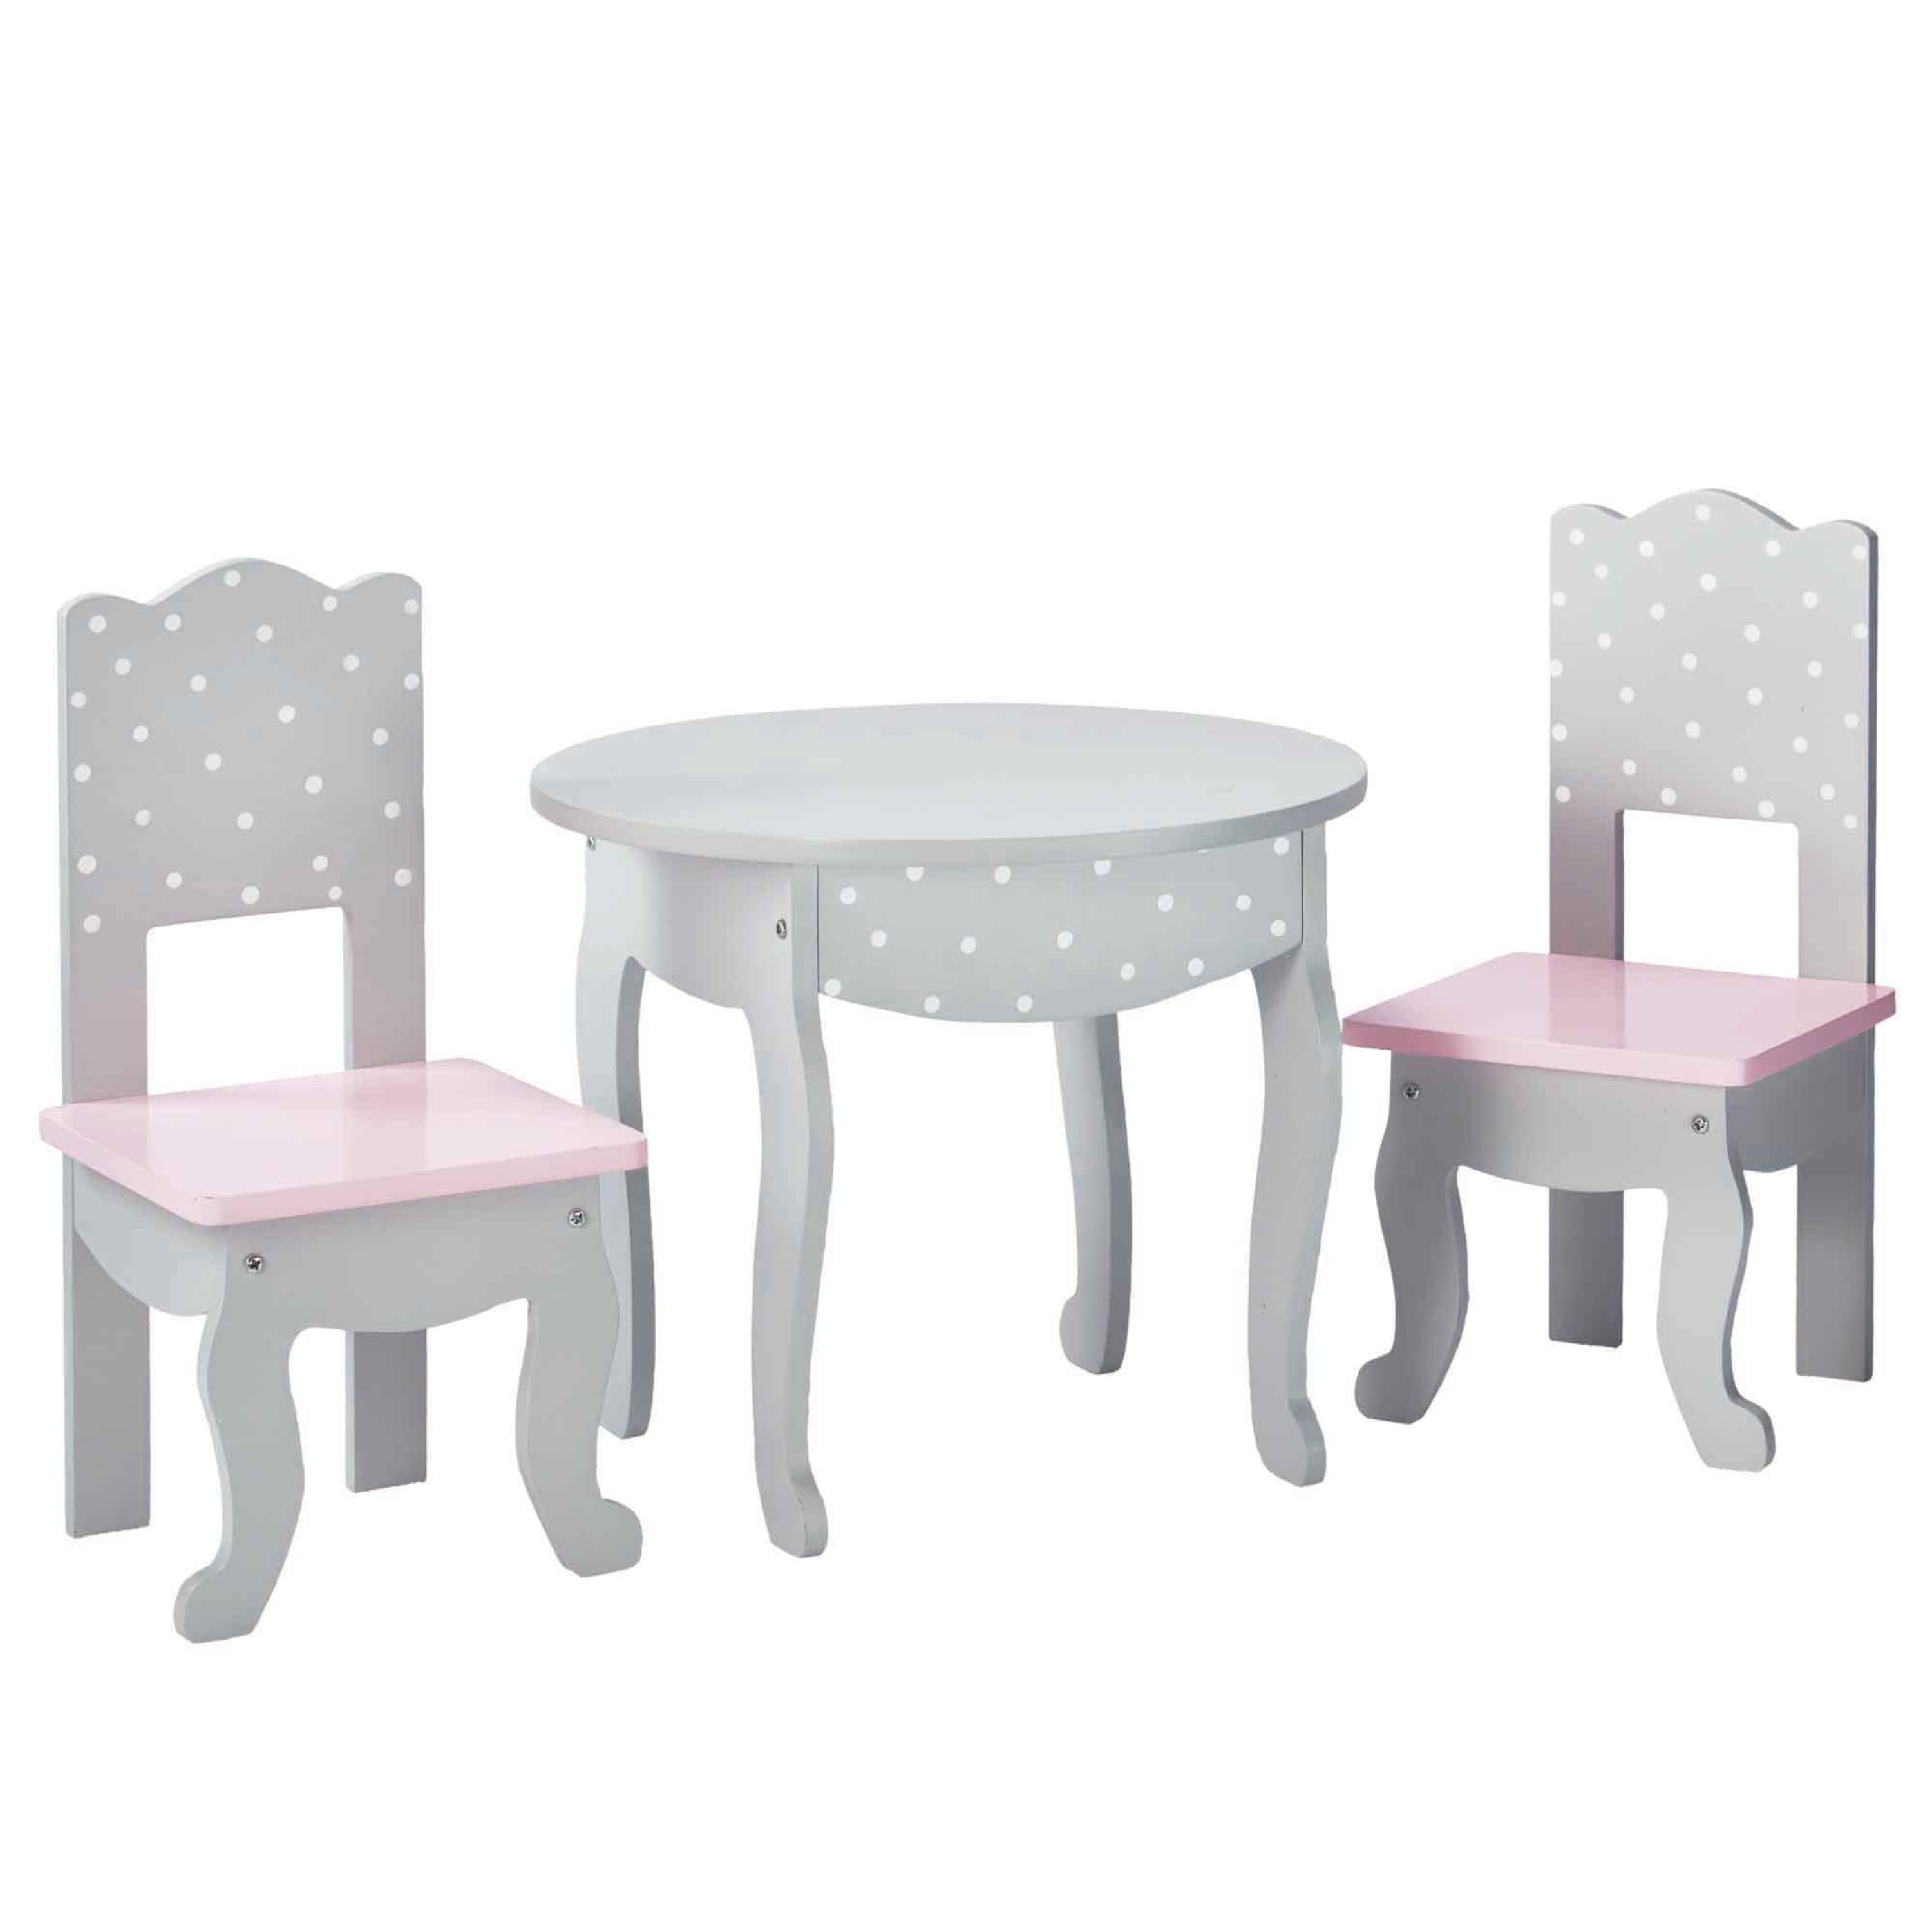 Olivias Little World White Princess Table and 2 Chairs Set | Wooden 18 inch Doll Furniture 